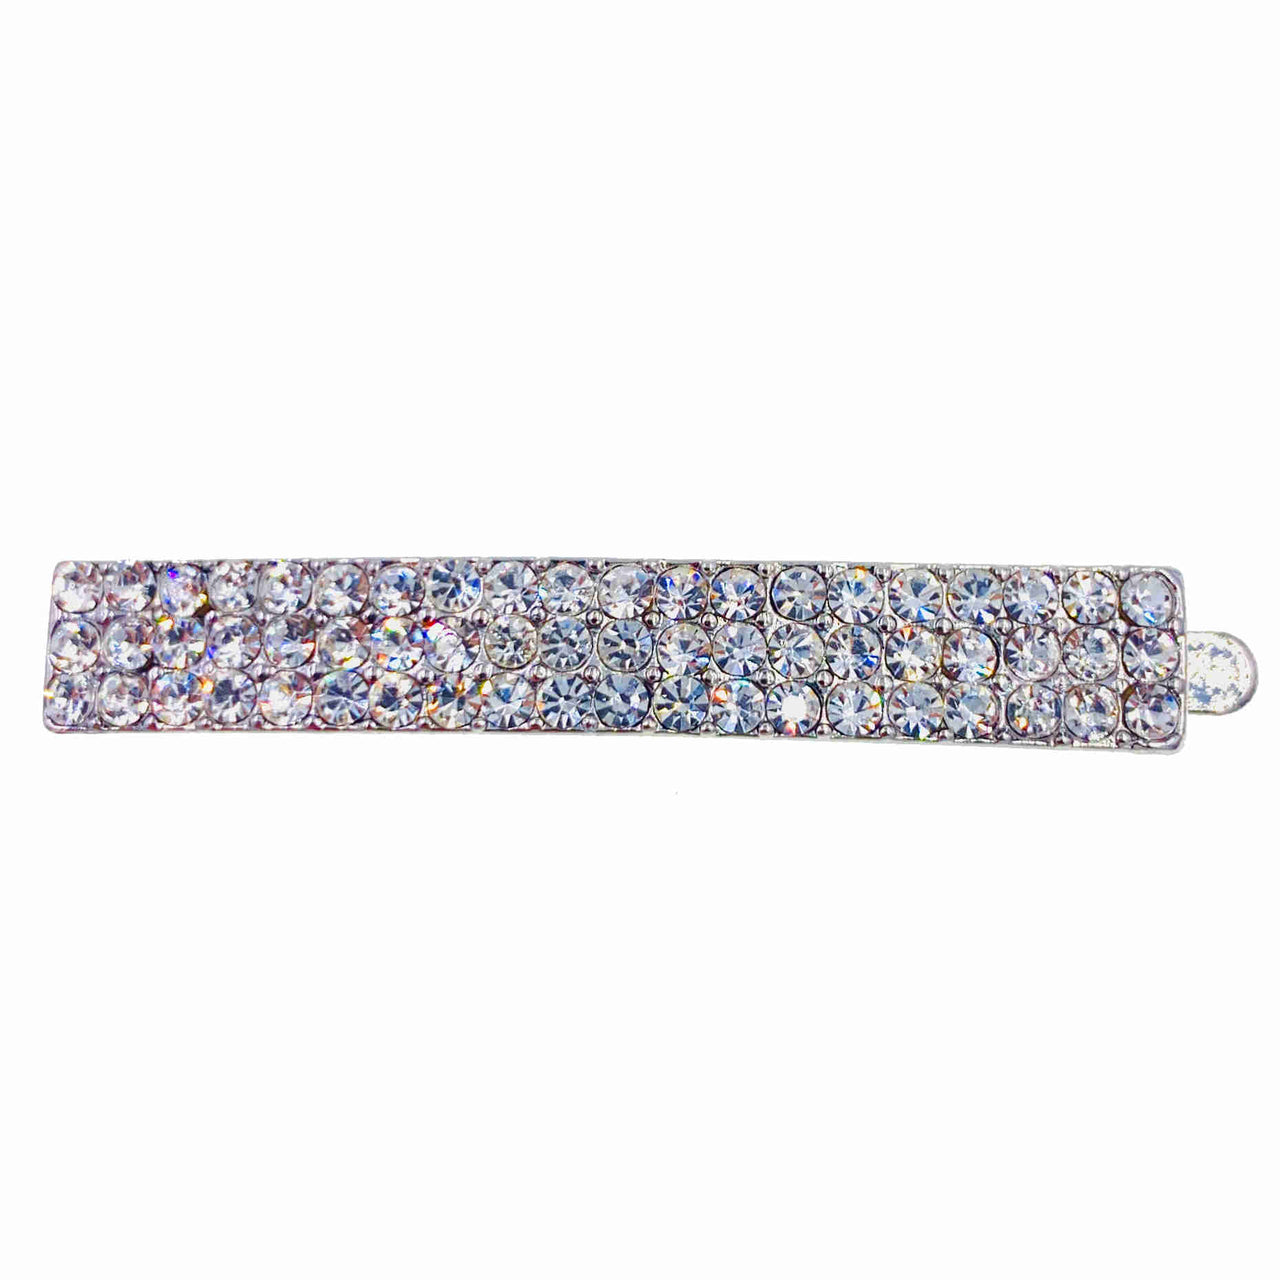 Sally Simple Magnetic Barrette Hair Clip Cubic Zirconia Crystal CZ17 Large